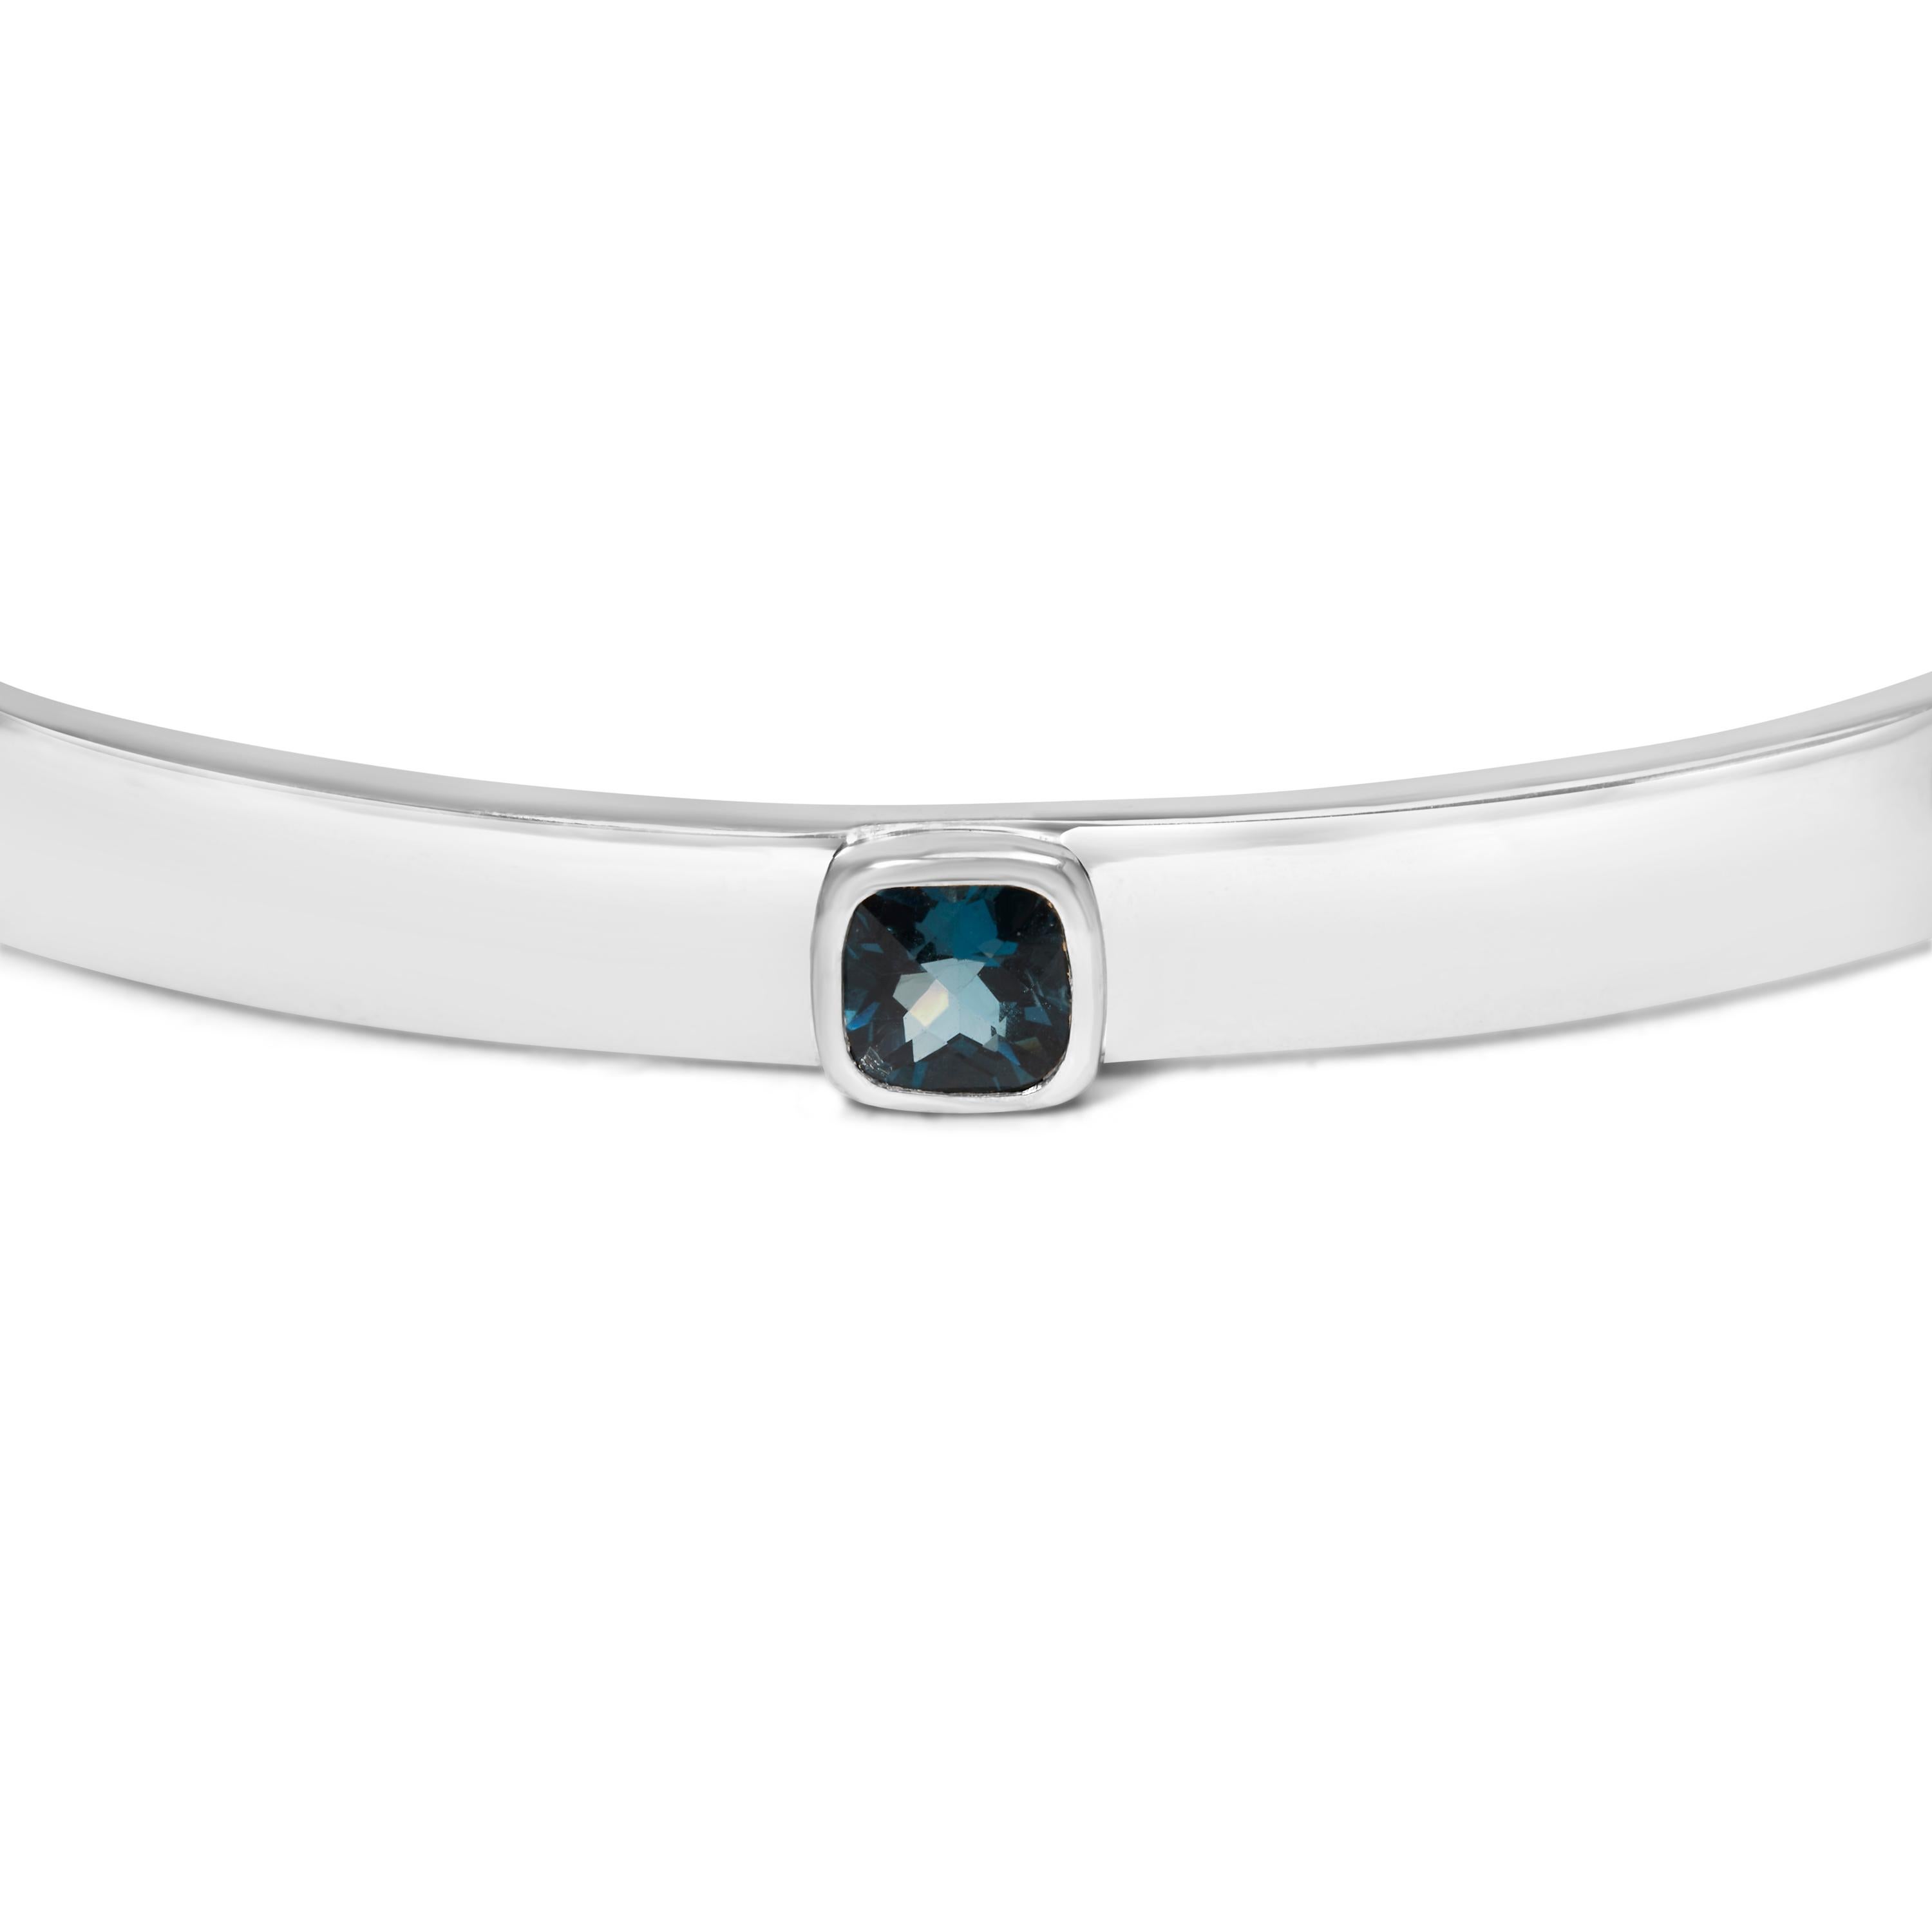 Introducing a dazzling masterpiece that will adorn your wrist with elegance and grace. This exquisite .925 Sterling Silver bangle showcases a mesmerizing 5mm Checkerboard Cushion Cut Blue Topaz gemstone, radiating a captivating blue hue. With a